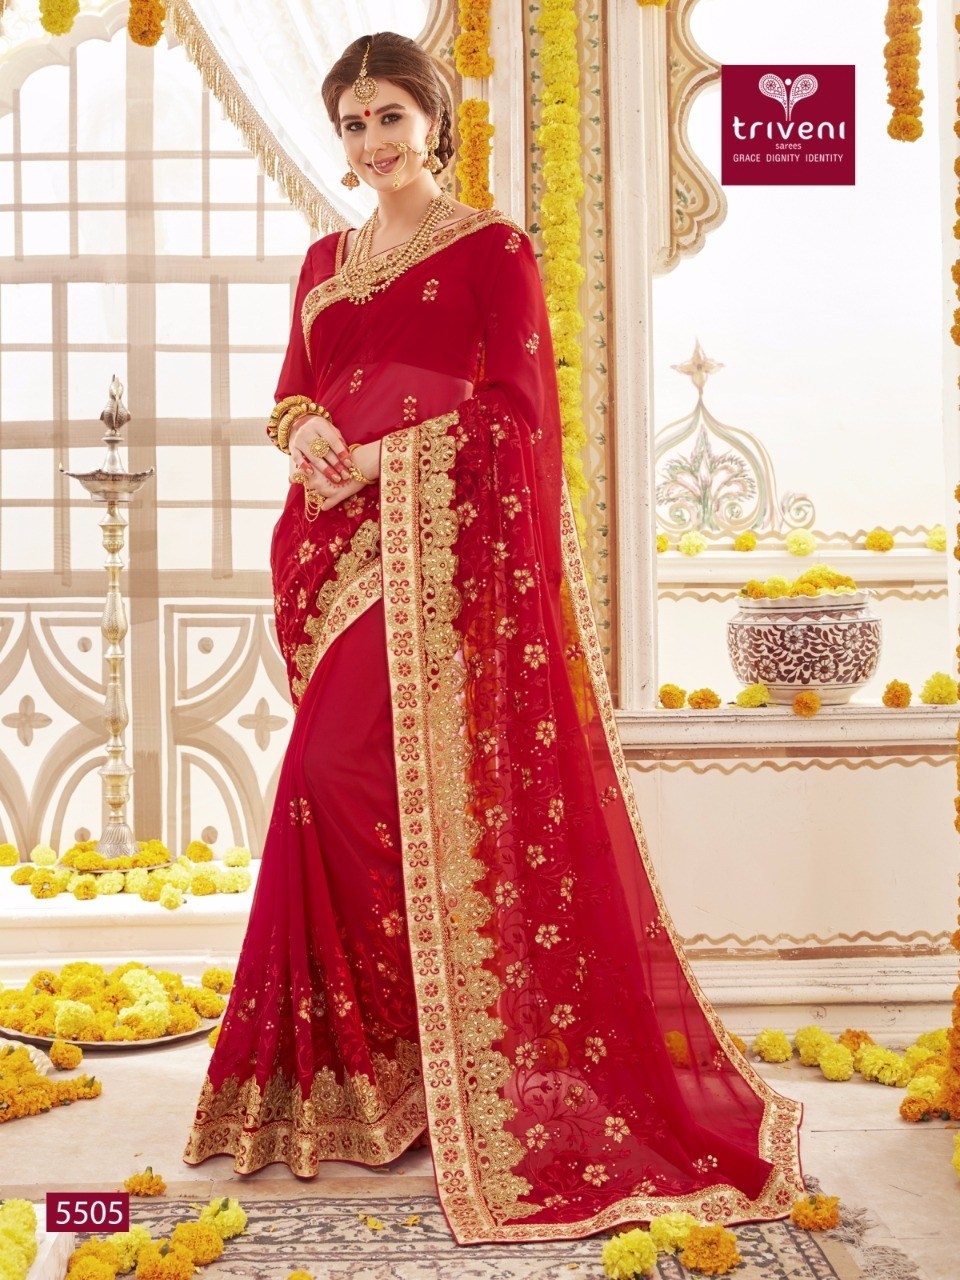 Dyed Georgette Heavy Embroidery Saree Diamond Work Blouse With Dupatta  Dulhan Special 03 | lupon.gov.ph